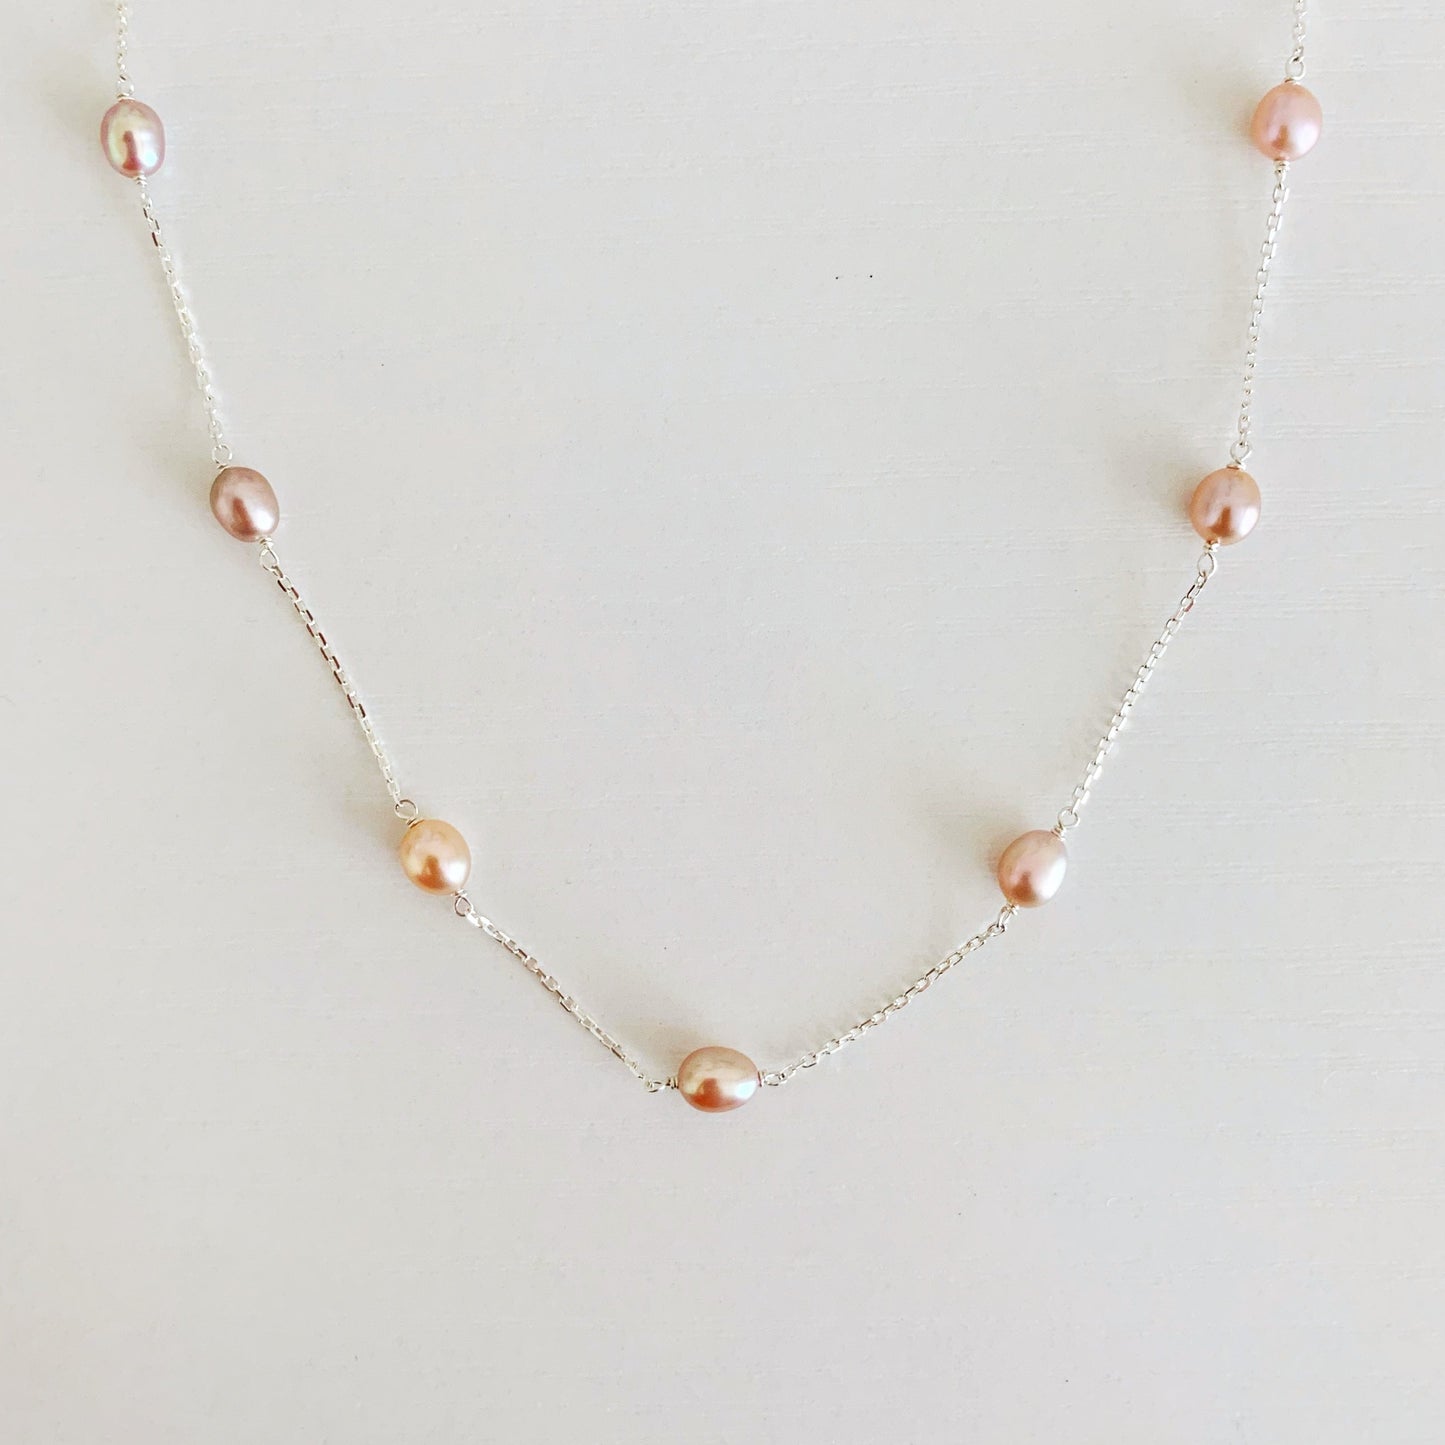 Block Island Necklace by mermaids and madeleines features pink natural color freshwater oval pearls in stations on sterling silver chain. this is a photo of just the front half of the necklace on a white surface